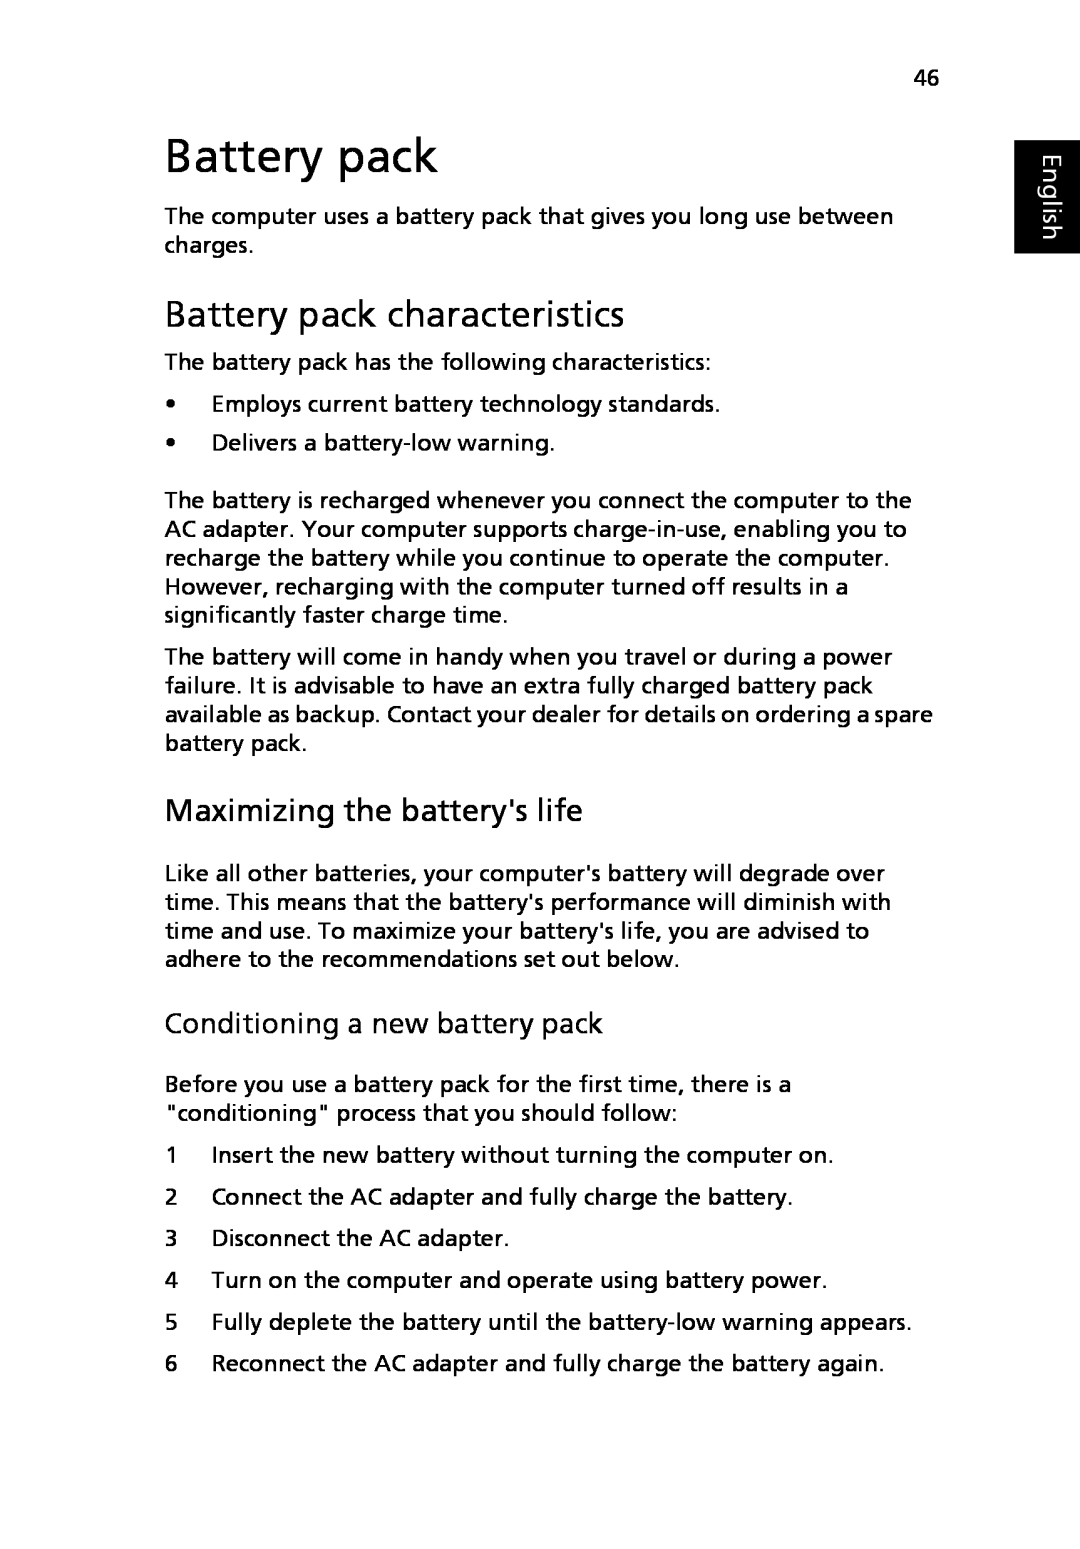 Acer LE1 manual Battery pack characteristics, Maximizing the batterys life, Conditioning a new battery pack, English 